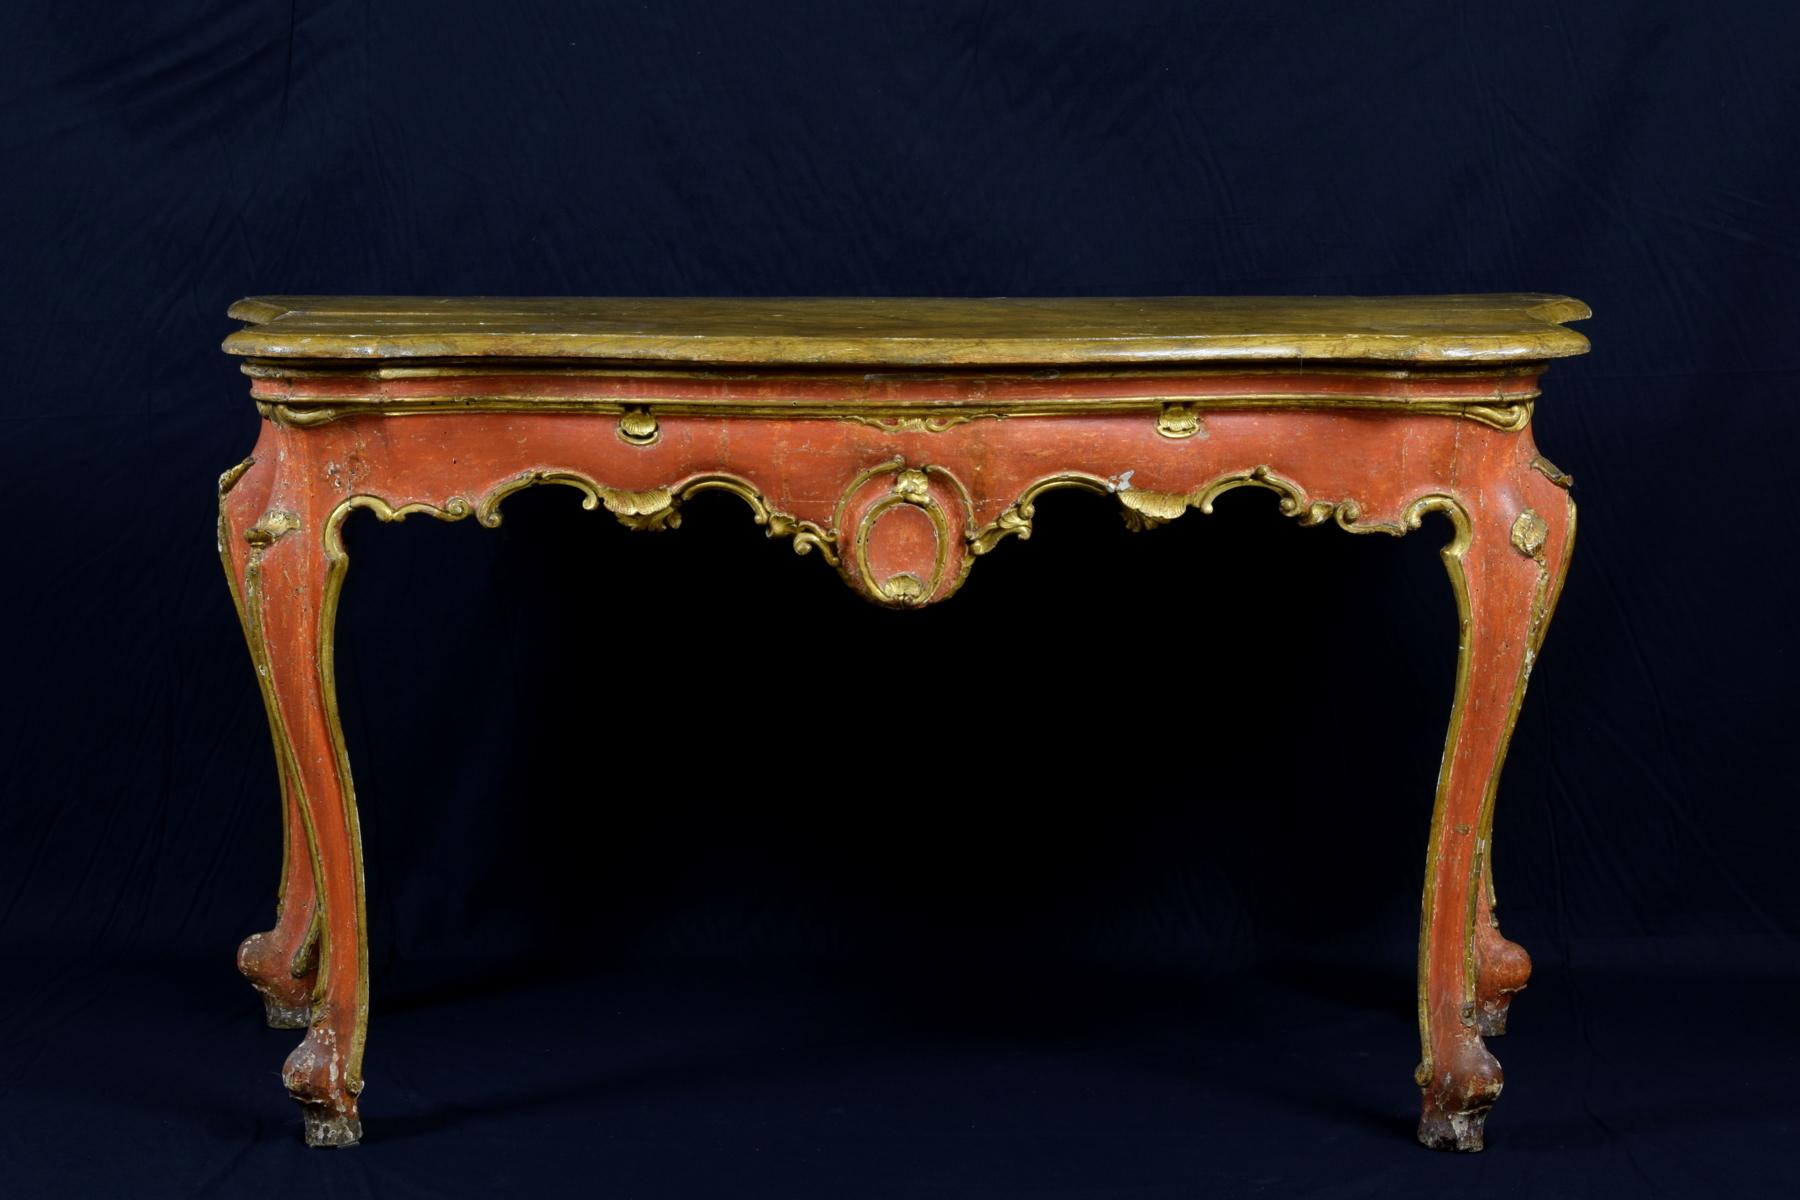 18th century, Italian Baroque wood lacquered consolle.

This console table in carved and lacquered wood is a fine example of the baroque Venetian decorative repertoire. The four legs are characterized by an arched movement and the top is lacquered